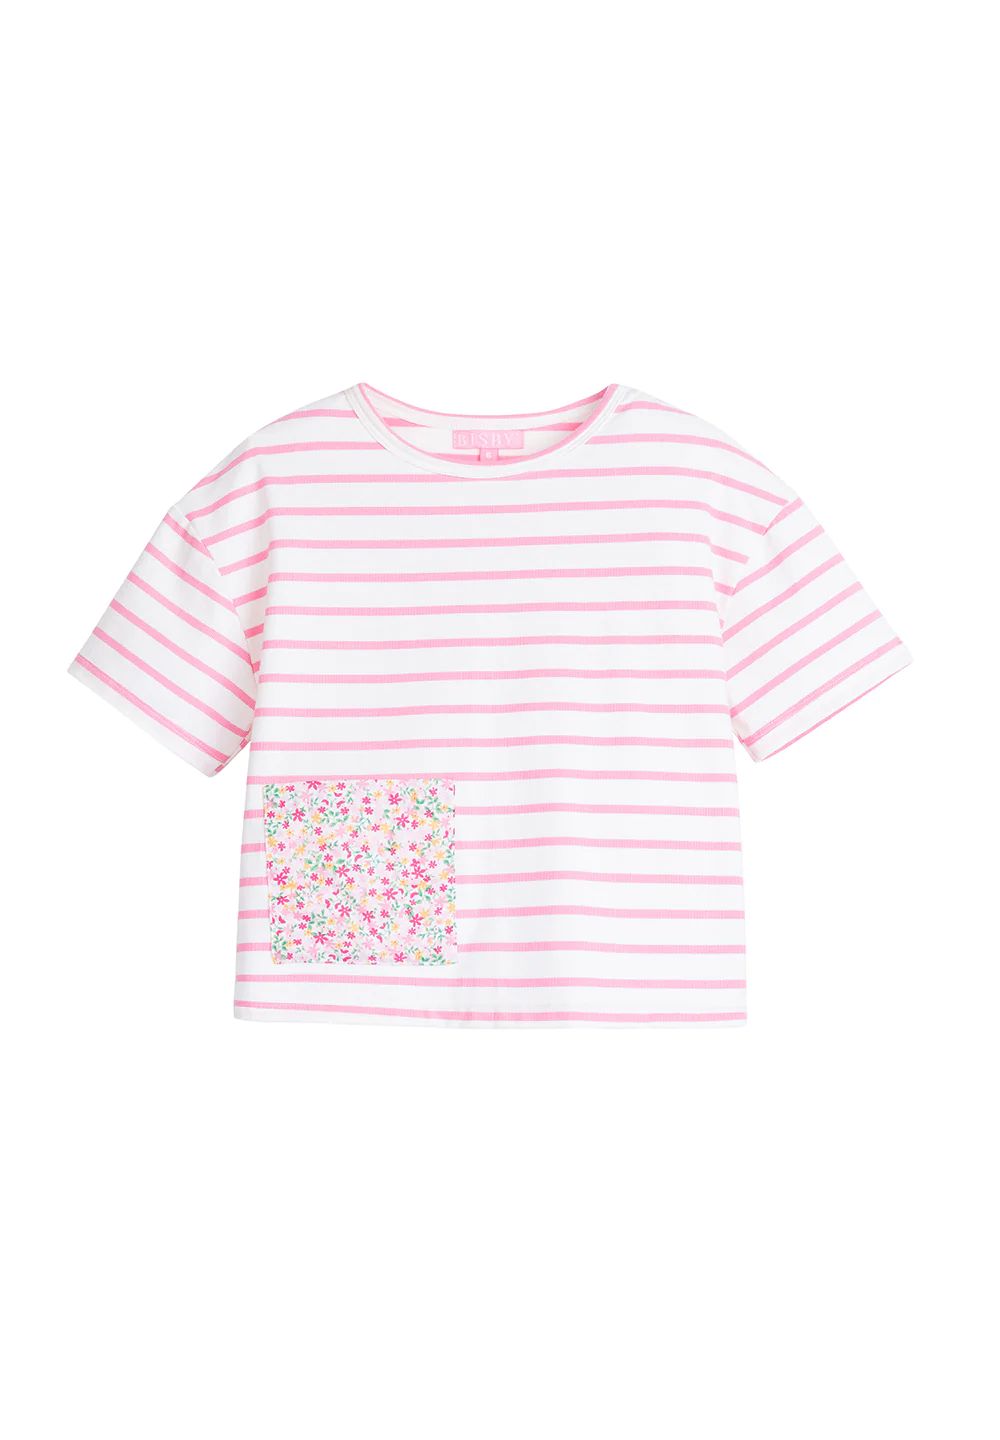 Boxy Tee - Dianthus Floral | BISBY Kids